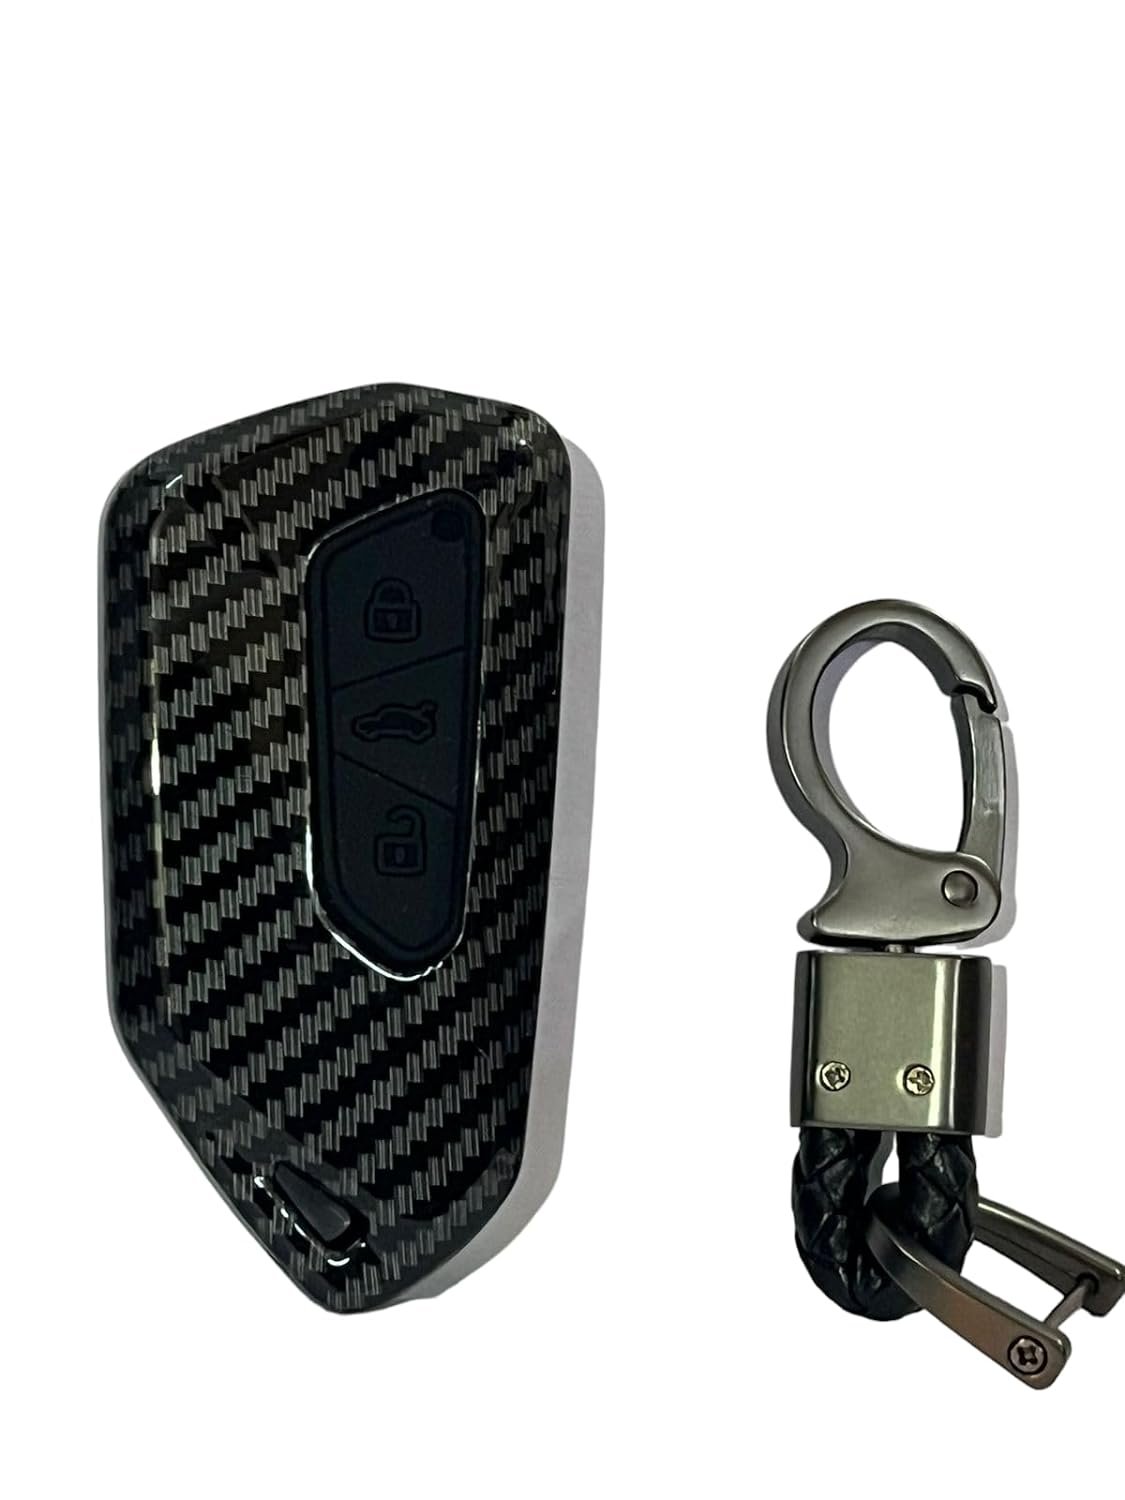 Carbon Fiber ABS Car Key Cover Compatible with Skoda Octavia (Key Chain Included) Image 